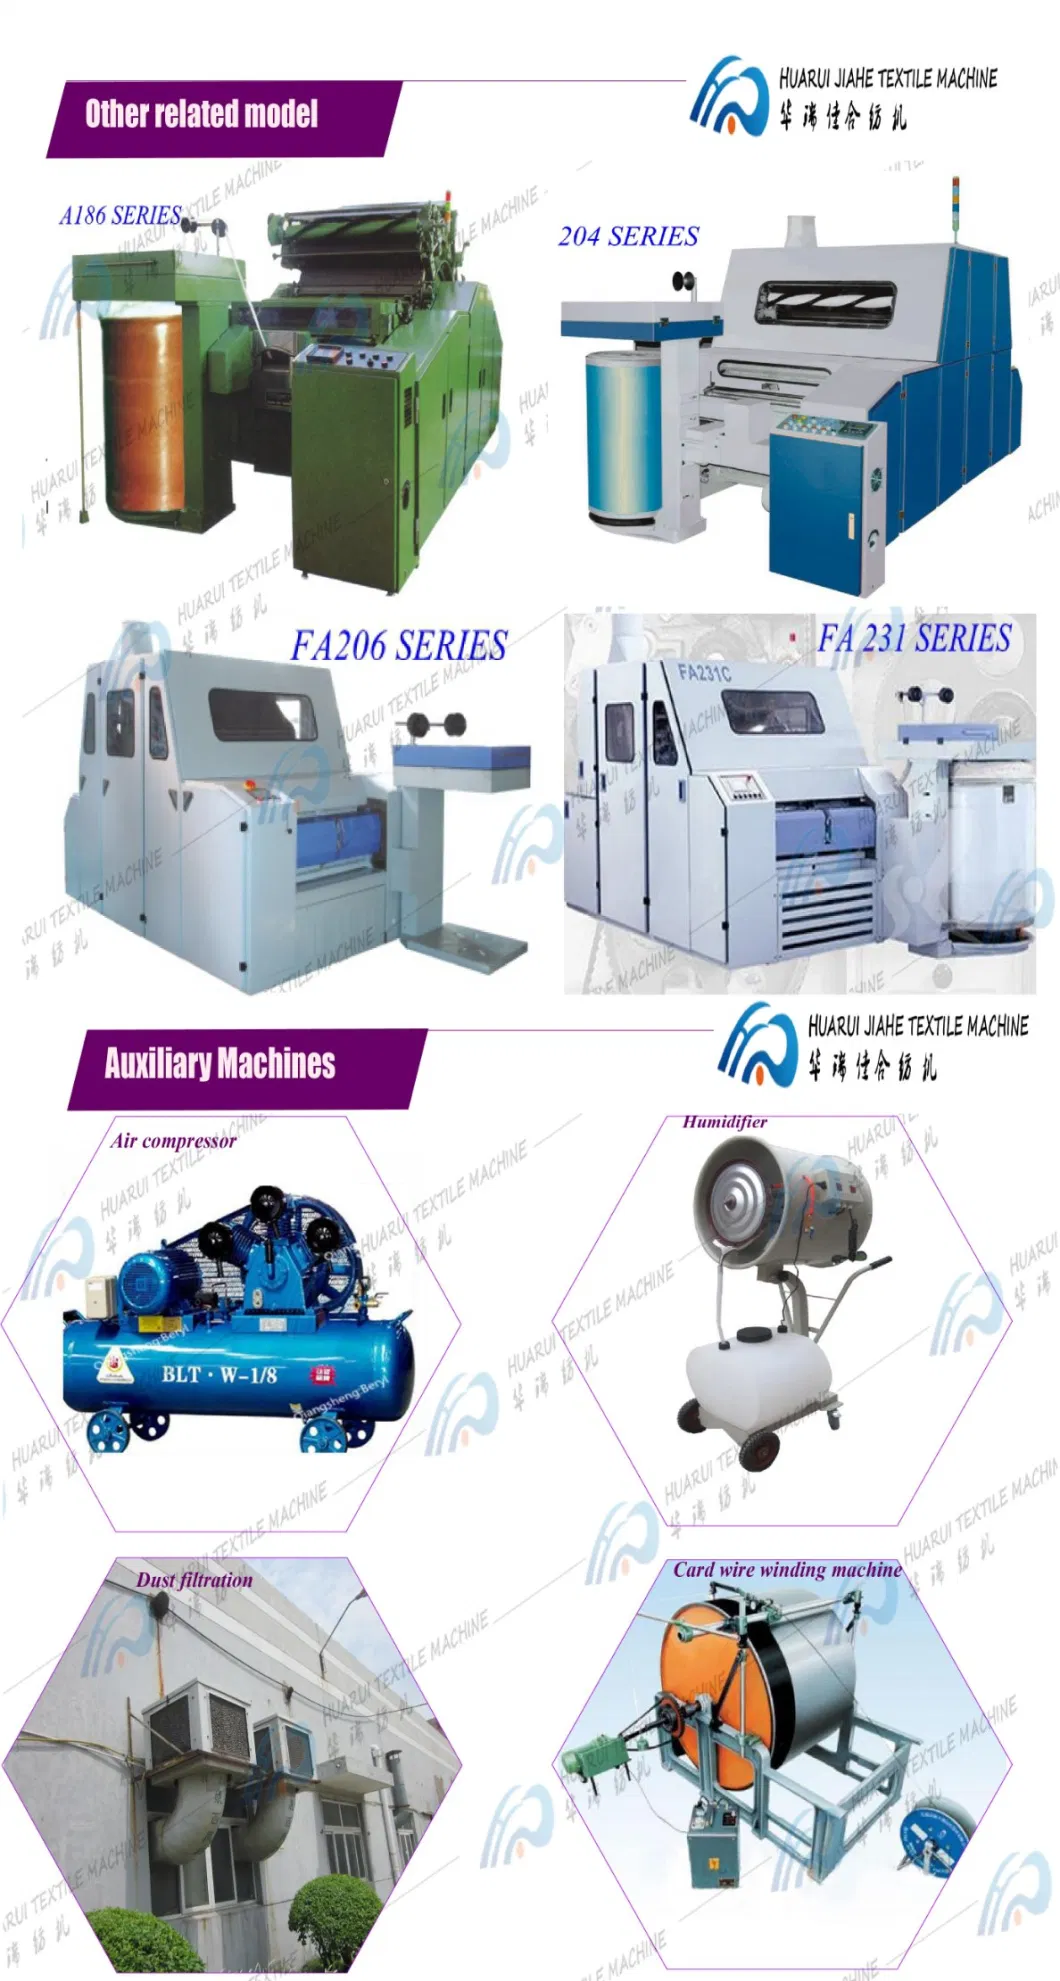 Cone Dyeing Machine Sample Lab Hthp Cotton Polyester Cone Package Cheese Yarn Bleaching and Dyeing Machine Viscose Yarn 50 Viscose Dyed Yarn